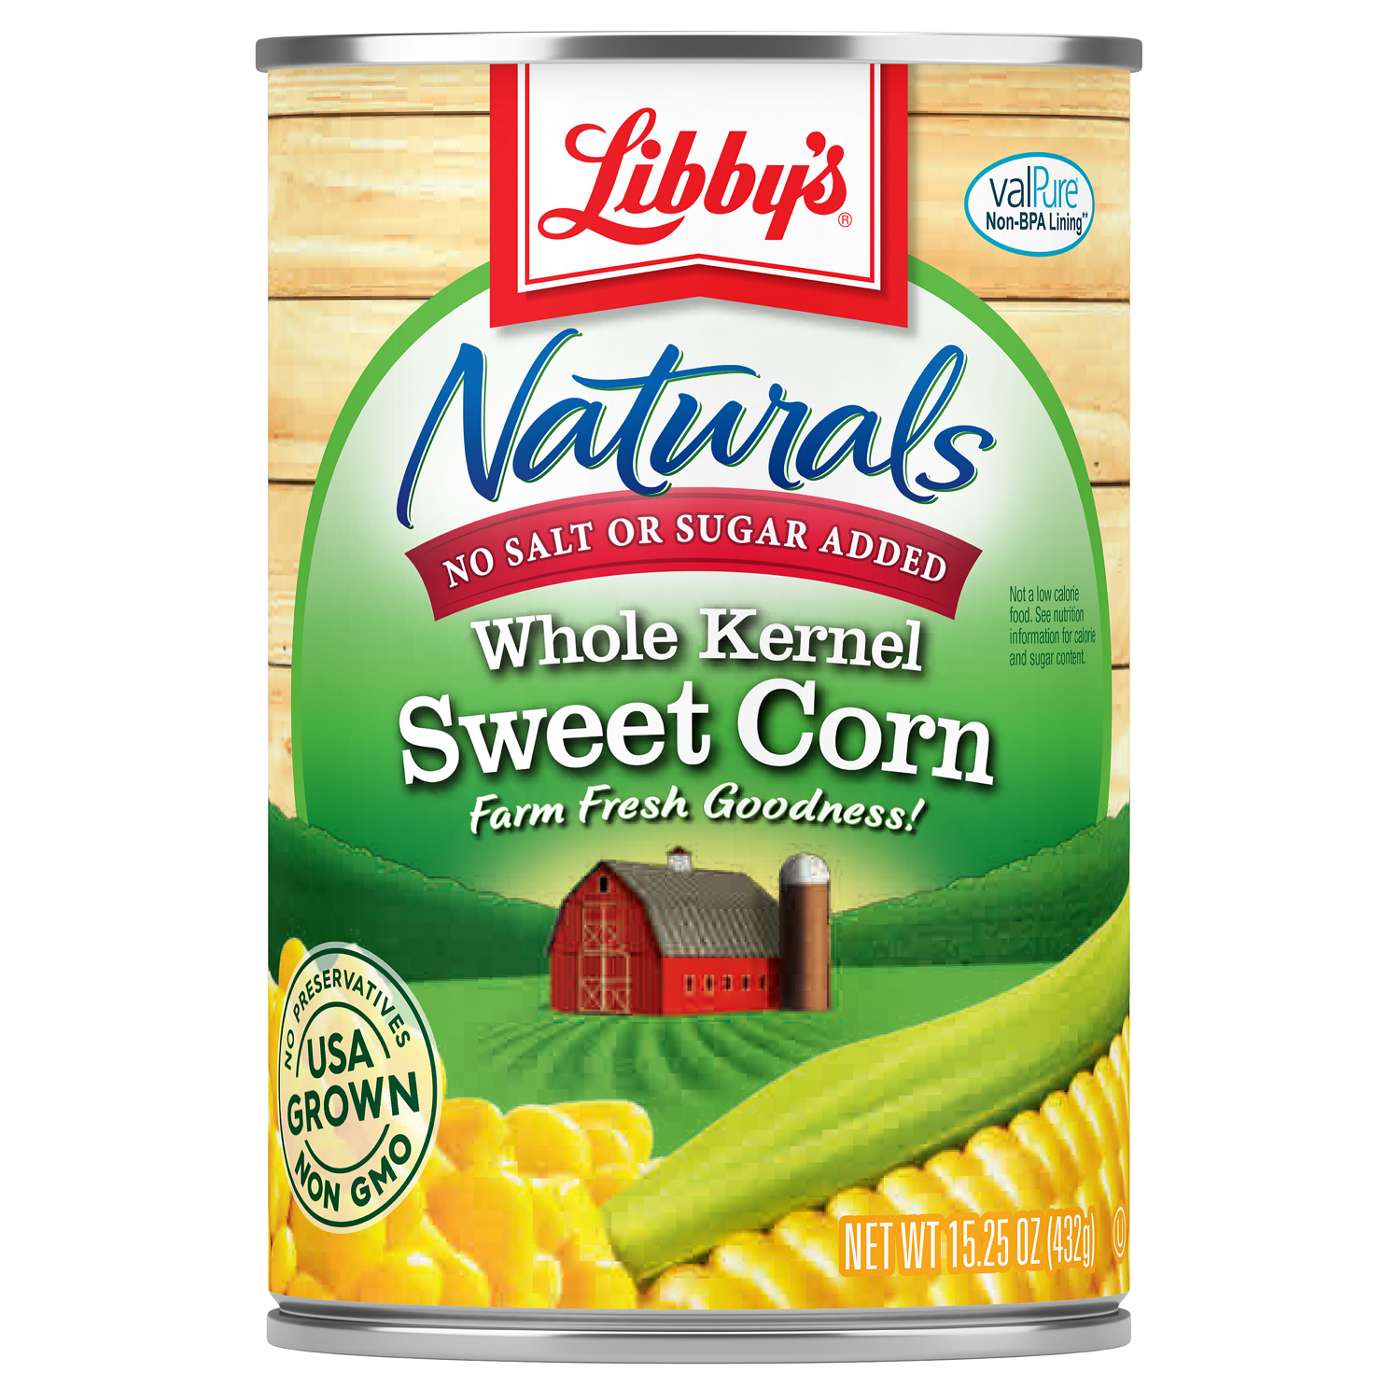 Libby's Naturals Whole Kernel Sweet Corn; image 1 of 4